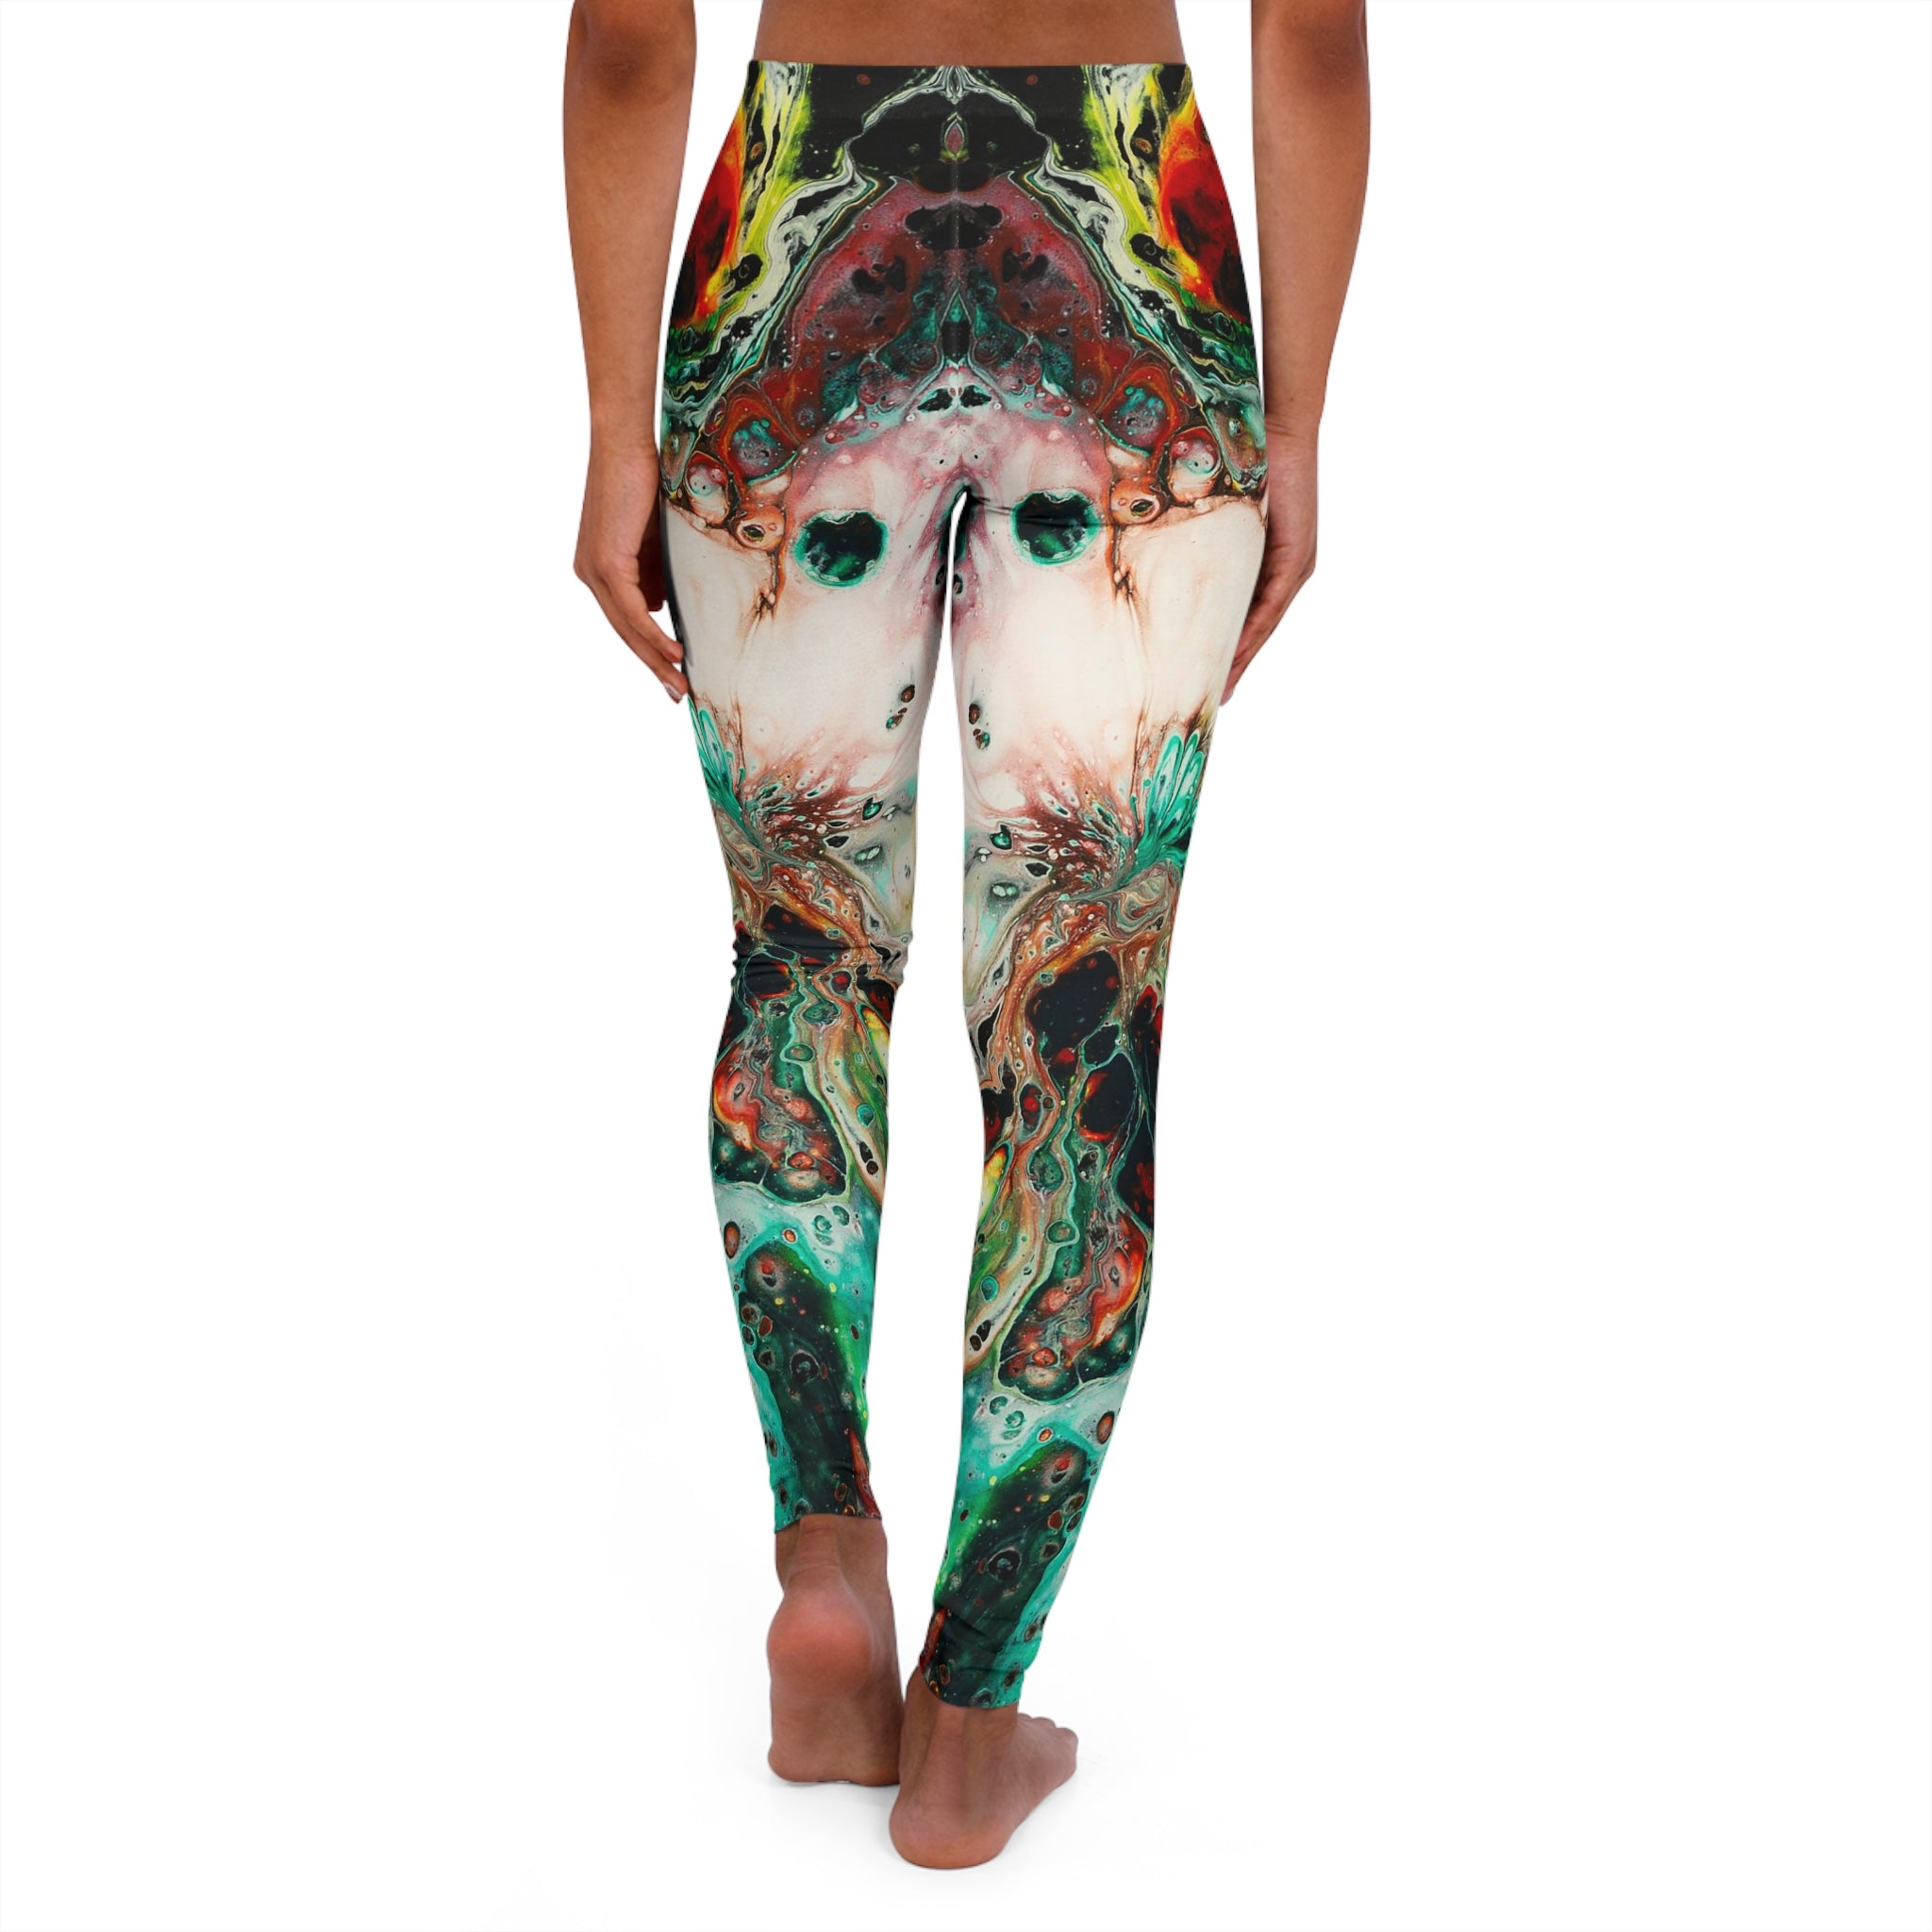 Women's Casual Leggings - Flowers Of The Galaxy - Back